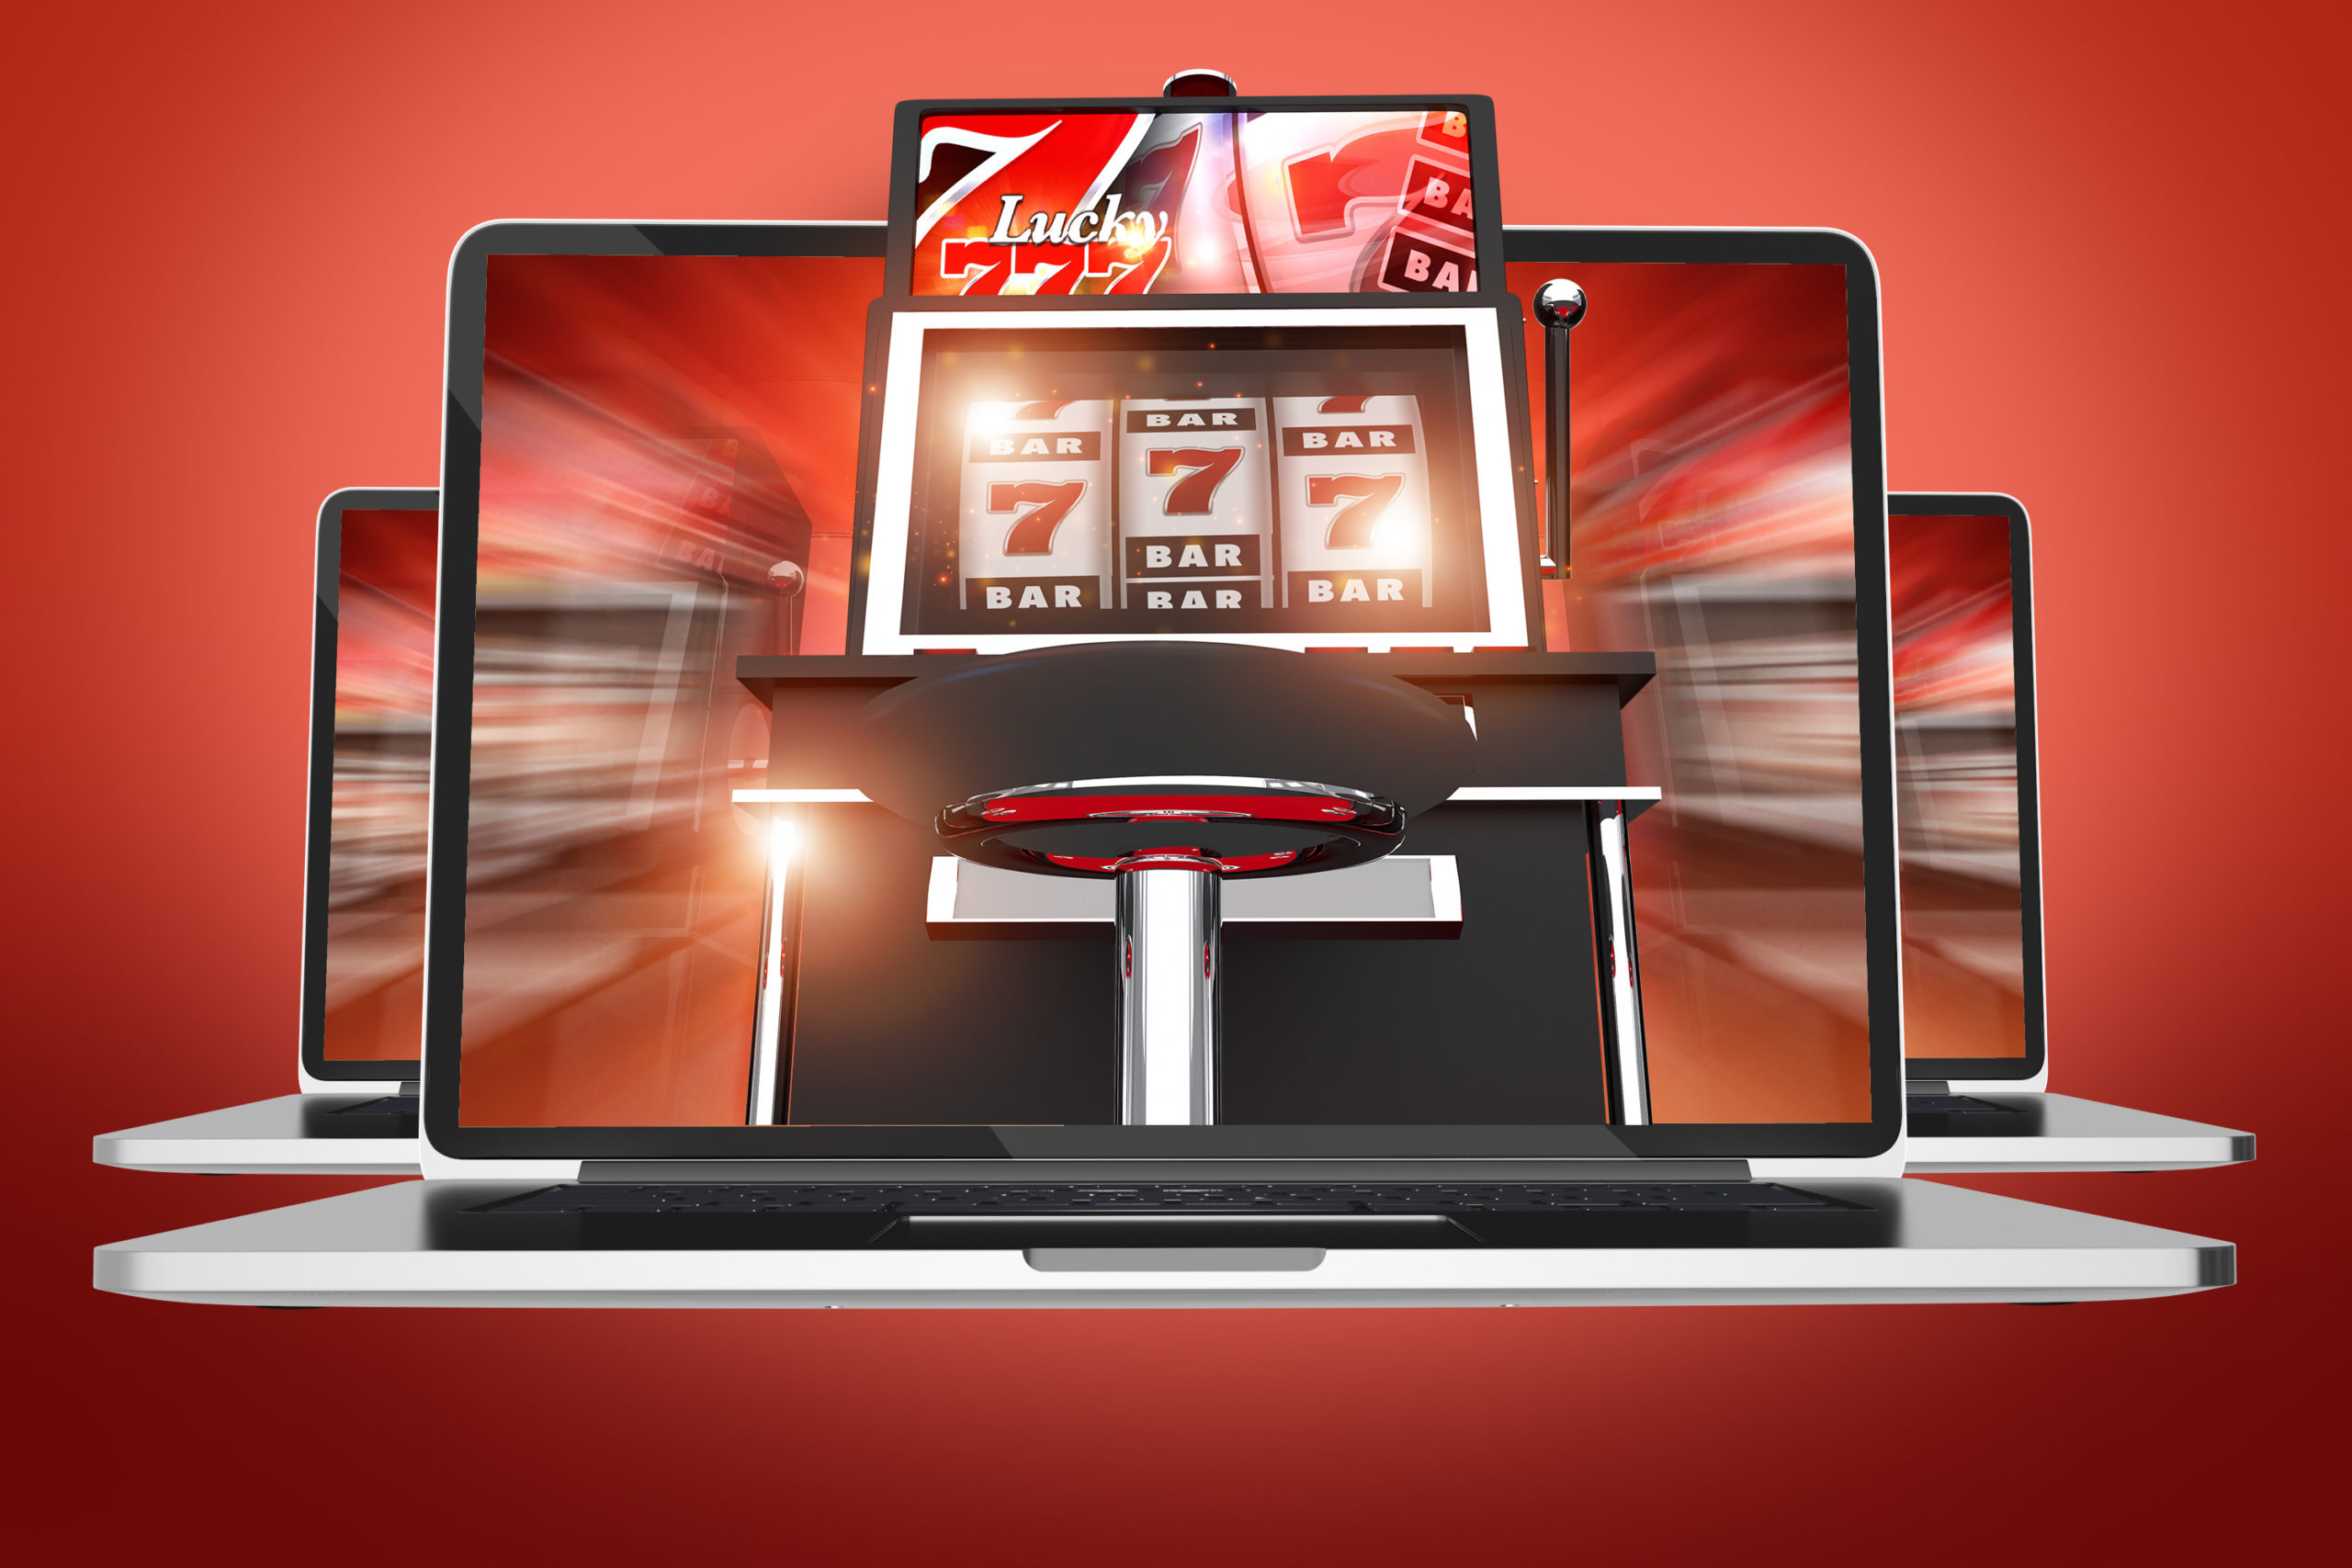 The Evolution of Online Slots: A Thrilling Journey into Digital Gambling, by Whichwebsiteisgoodtoplayslots